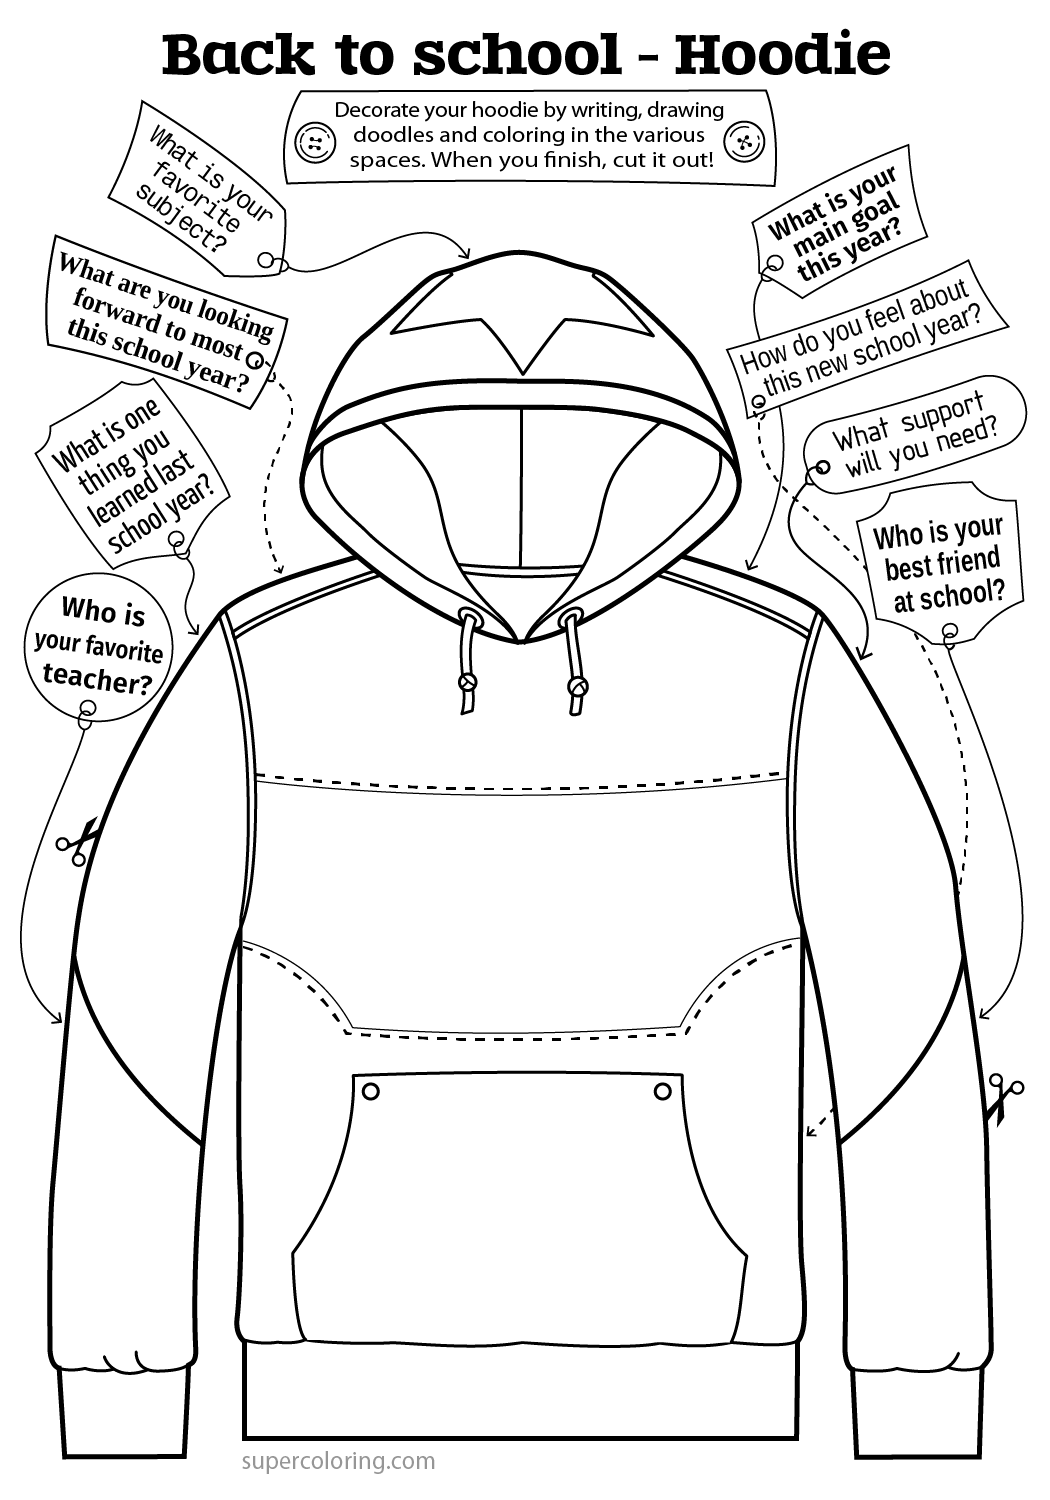 Back to school hoodie for writing activity free printable papercraft templates